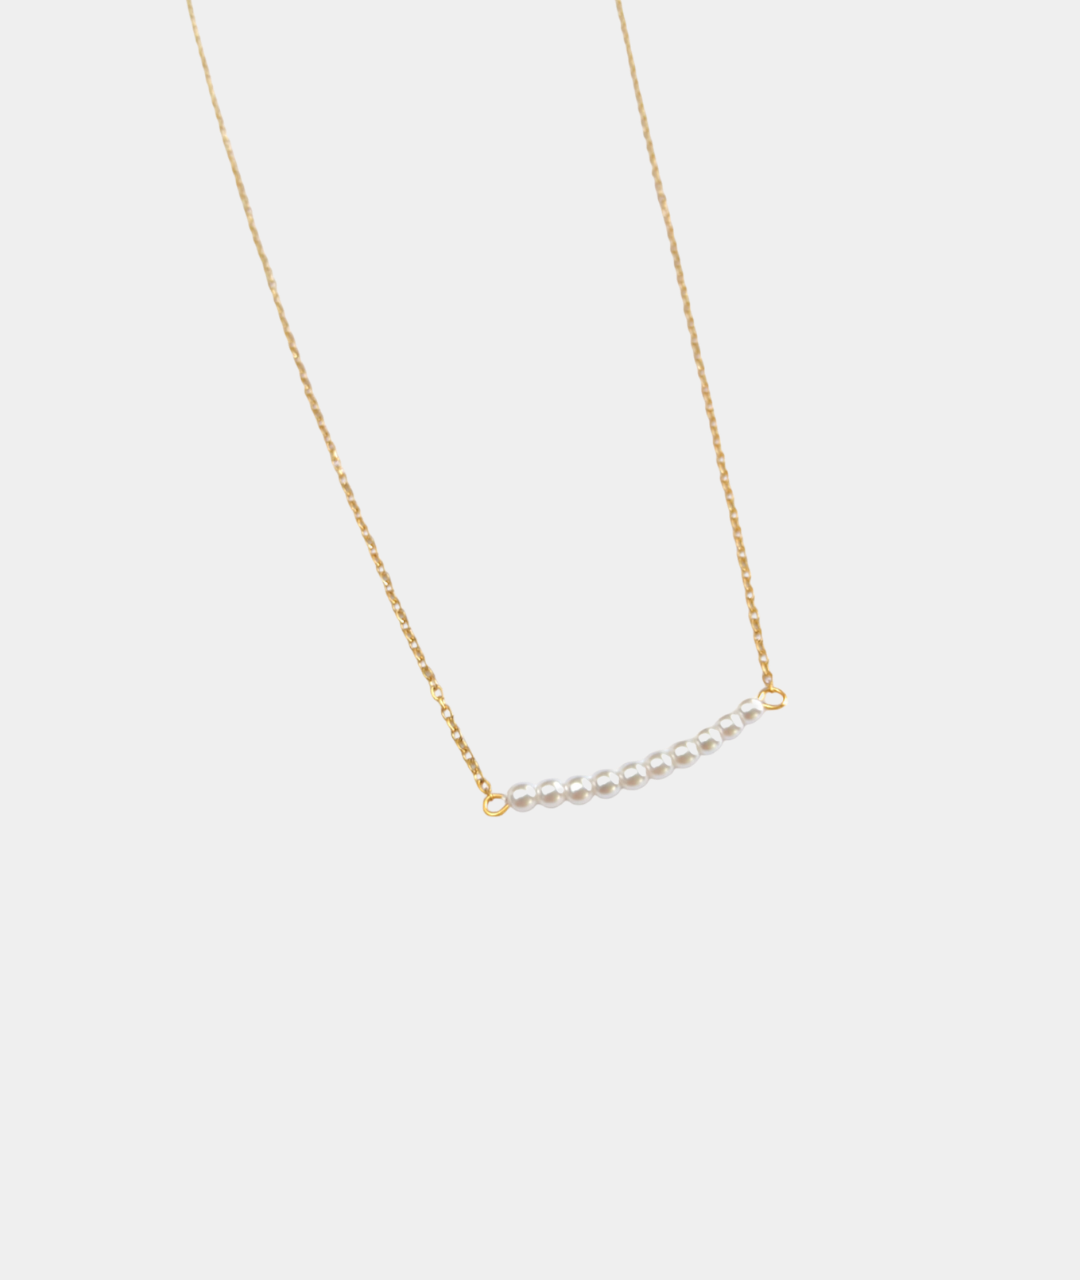 Joan | stainless steel necklace